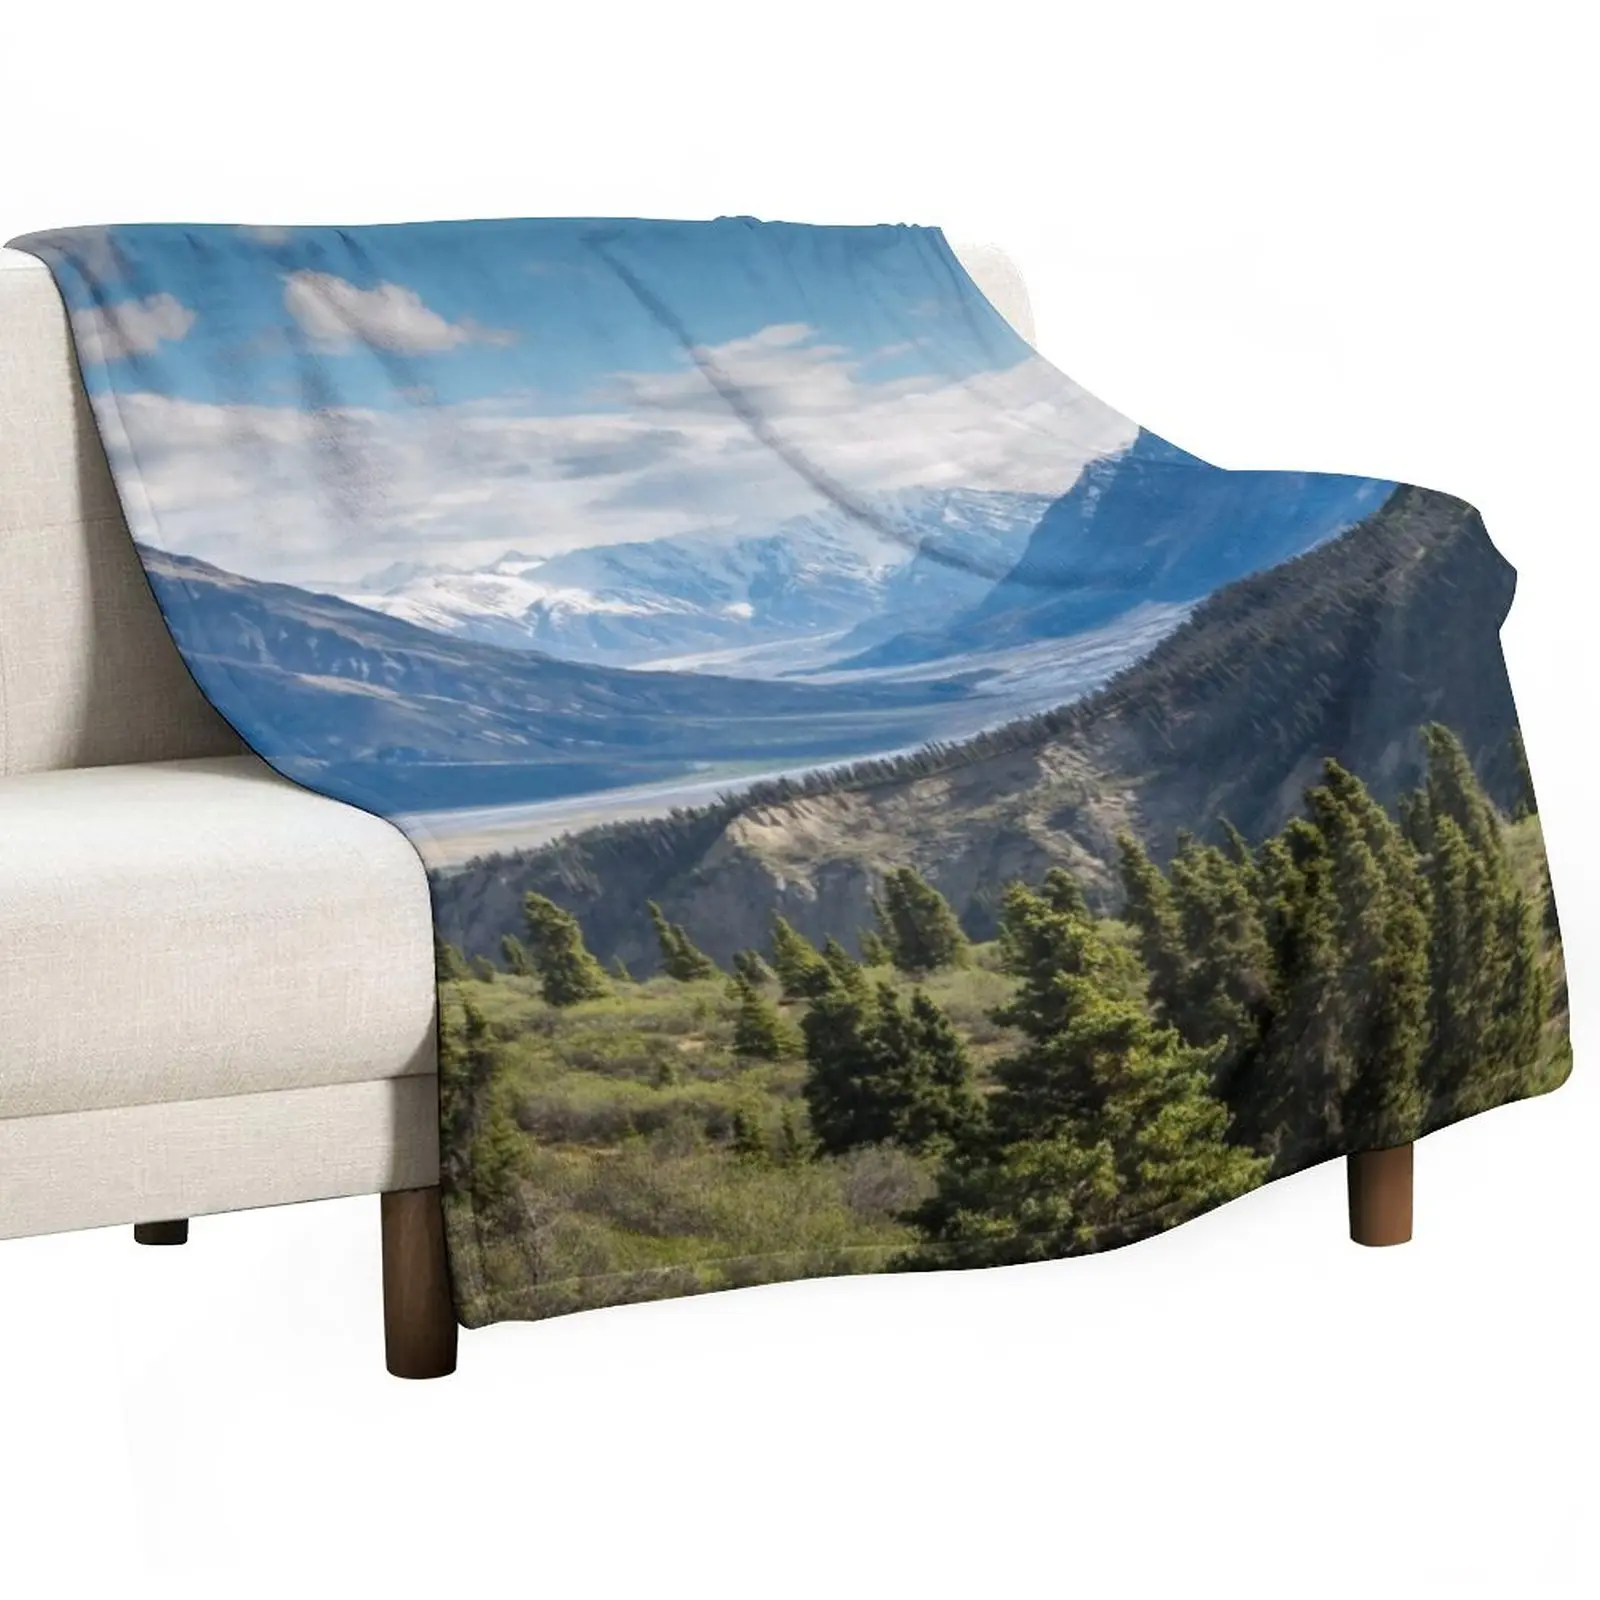 

Forest Mountains River National Park Nature Photography Wall Art Throw Blanket Shaggy Cute warm winter Blankets